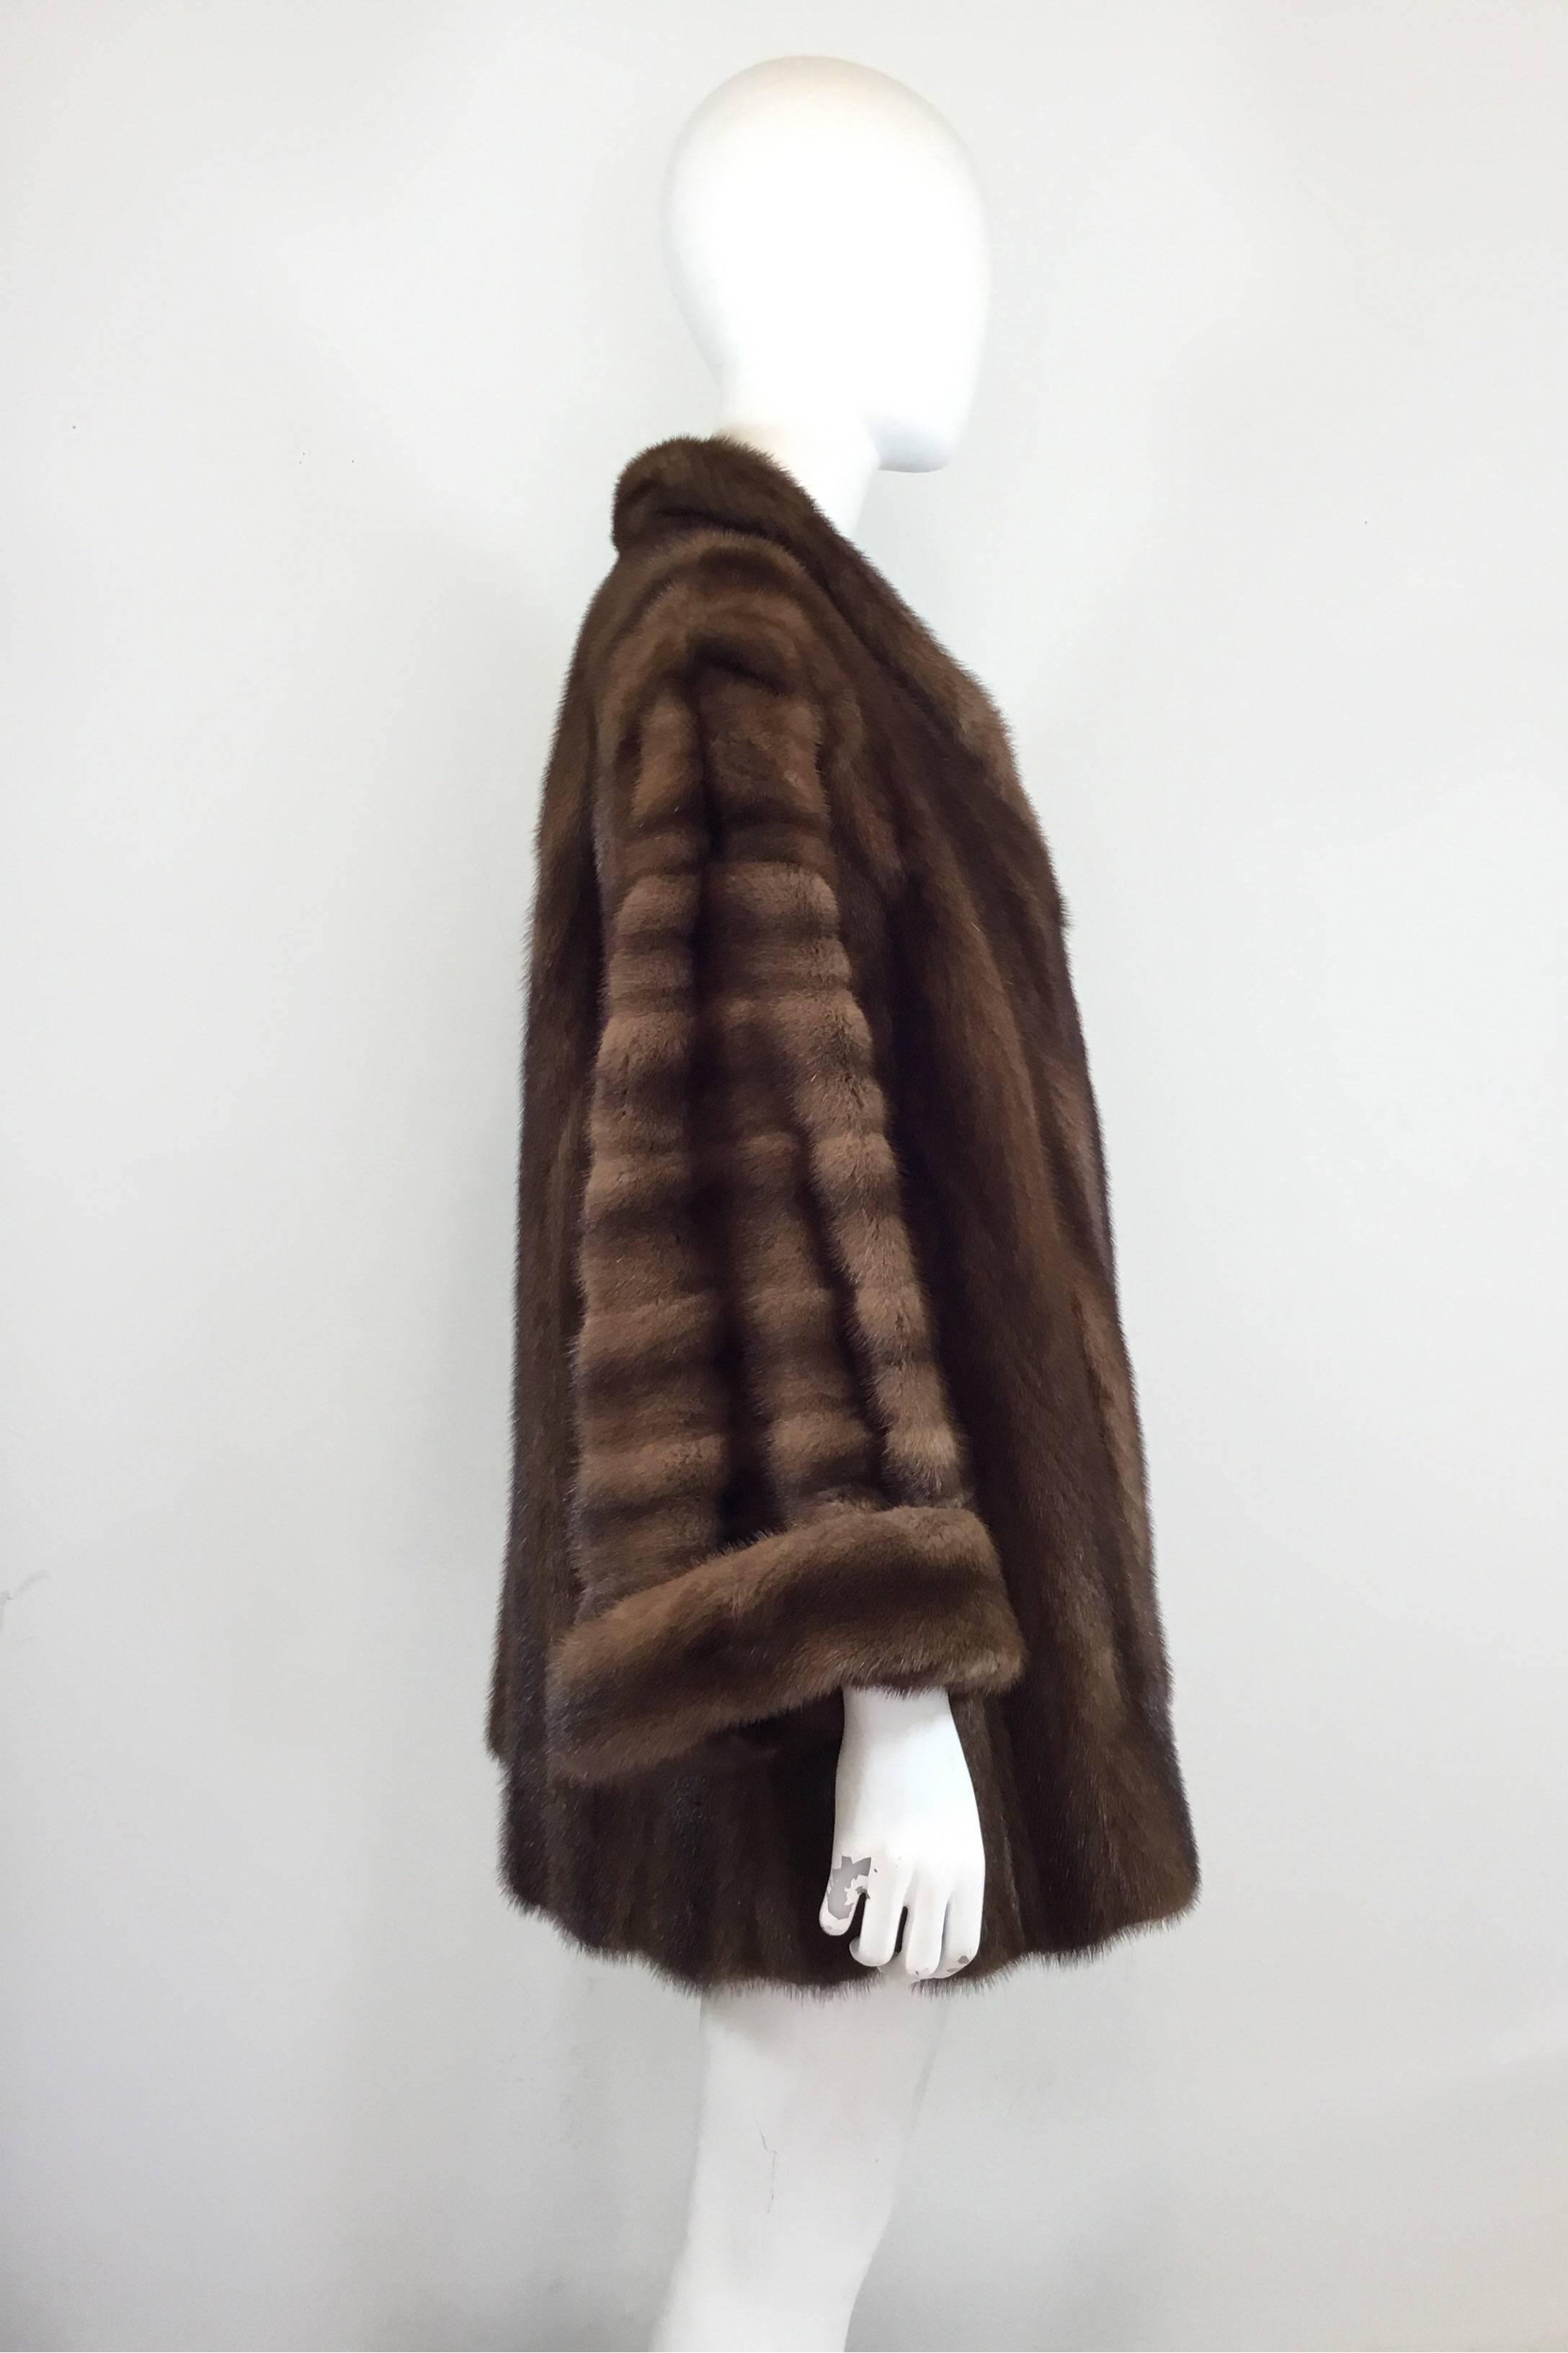 Christian Dior coat featured in brown mink fur with a single button closure. Coat is fully lined and has pockets at the hem.

bust 40'', sleeves 20'', length 33''